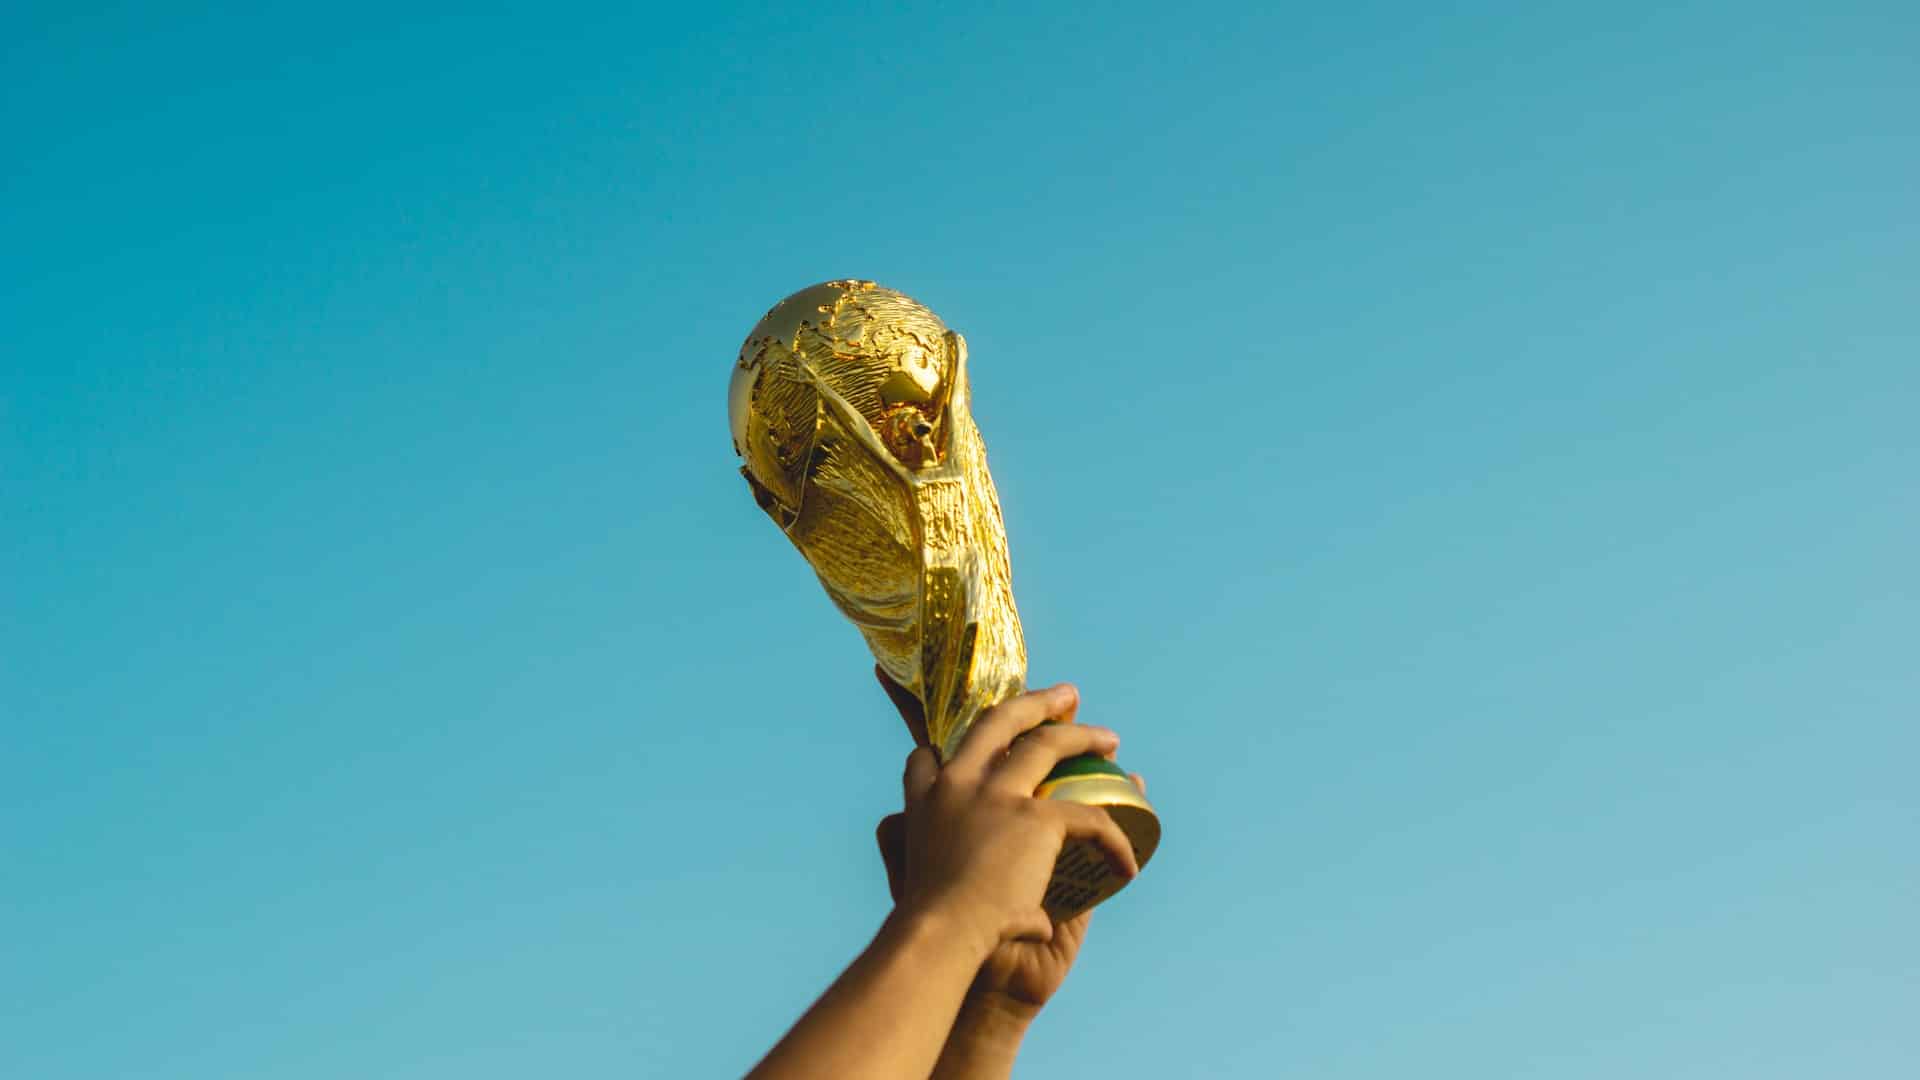 Who is the favorite to win the 2022 World Cup?